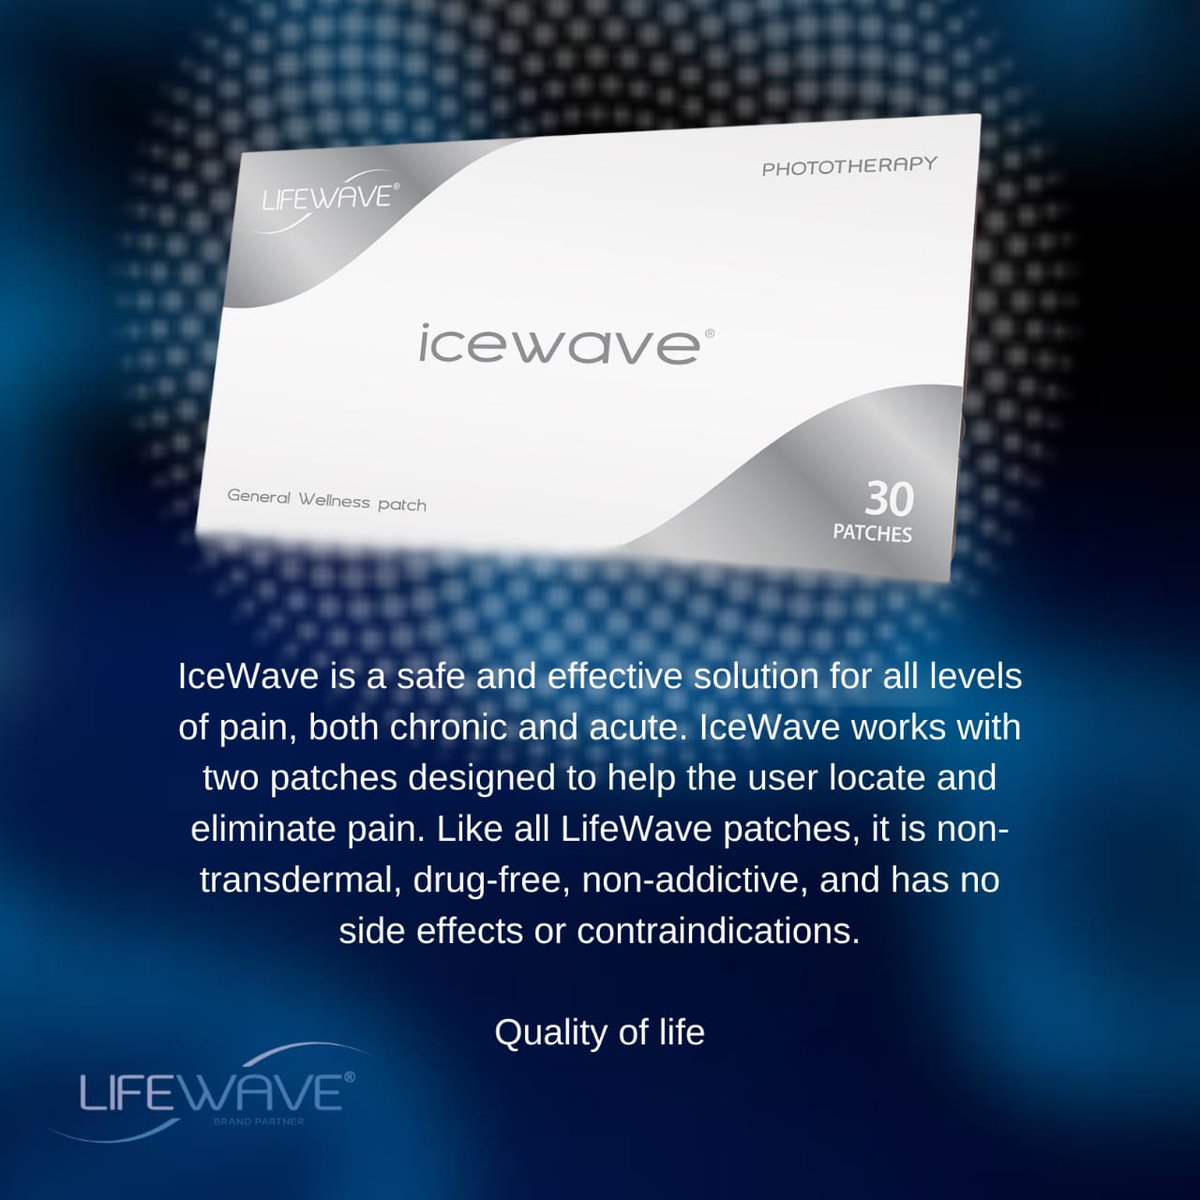 LifeWave Icewave patches provide relief at the source of aches, pains, and discomfort.

LEARN MORE: nbvitality.com/lifewave-icewa…

#lifewave  #icewavepatches #icewave #painrelief #naturalpainrelief #alternativehealth #alternativehealthsolutions #nbvitality